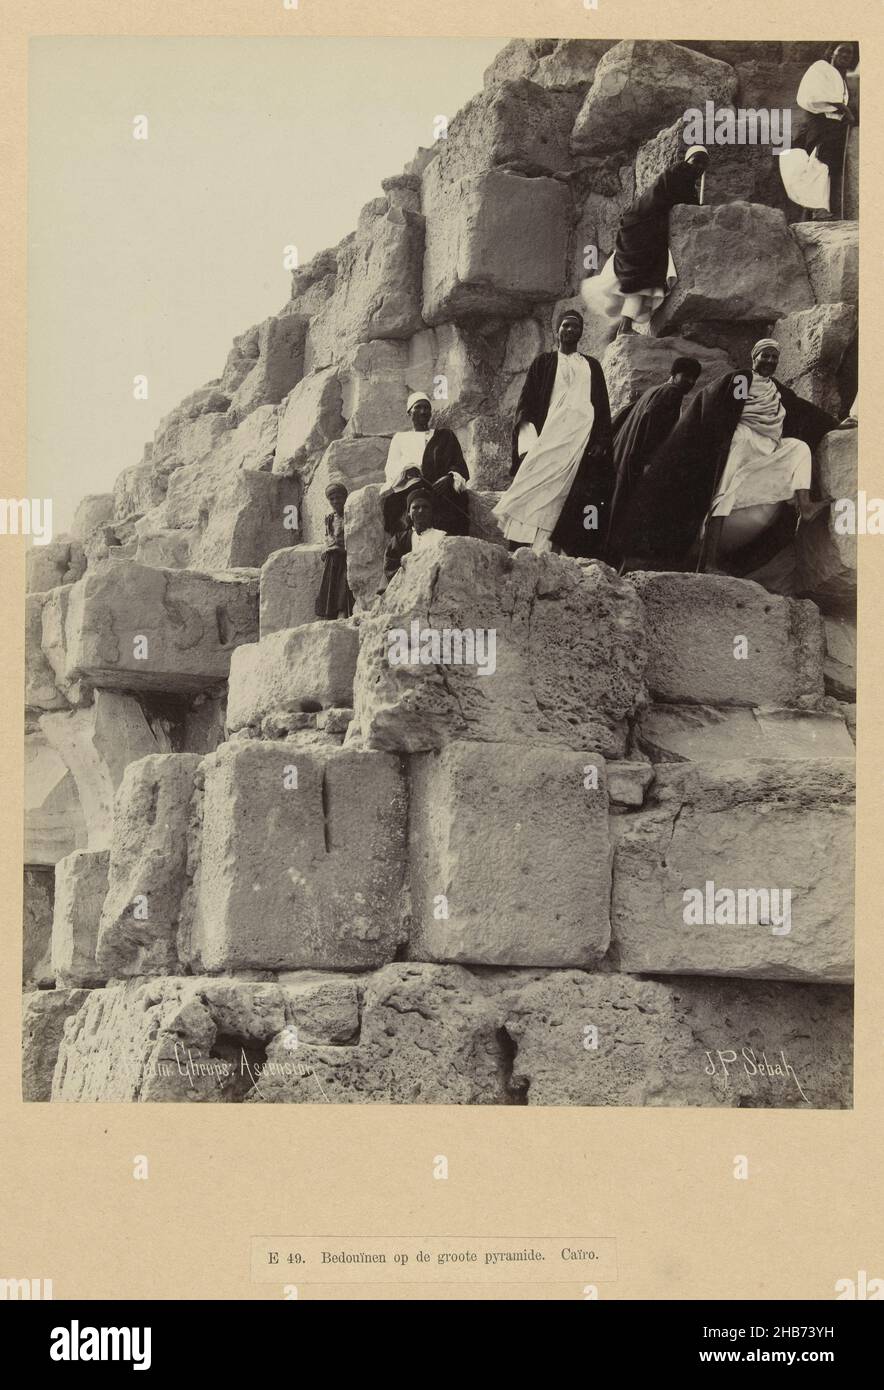 A group of men climb the pyramid of Cheops.EE 49. Bedouins on the great pyramid. Cairo (title on object), Egypt (series title)230 Pyram. Cheops Ascension (title on object), The photograph is part of the series of photographs from Egypt collected by Richard Polak., Pascal Sébah (mentioned on object), Egypte, c. 1888 - c. 1898, photographic support, paper, albumen print, height 267 mm × width 202 mmheight 557 mm × width 467 mm Stock Photo